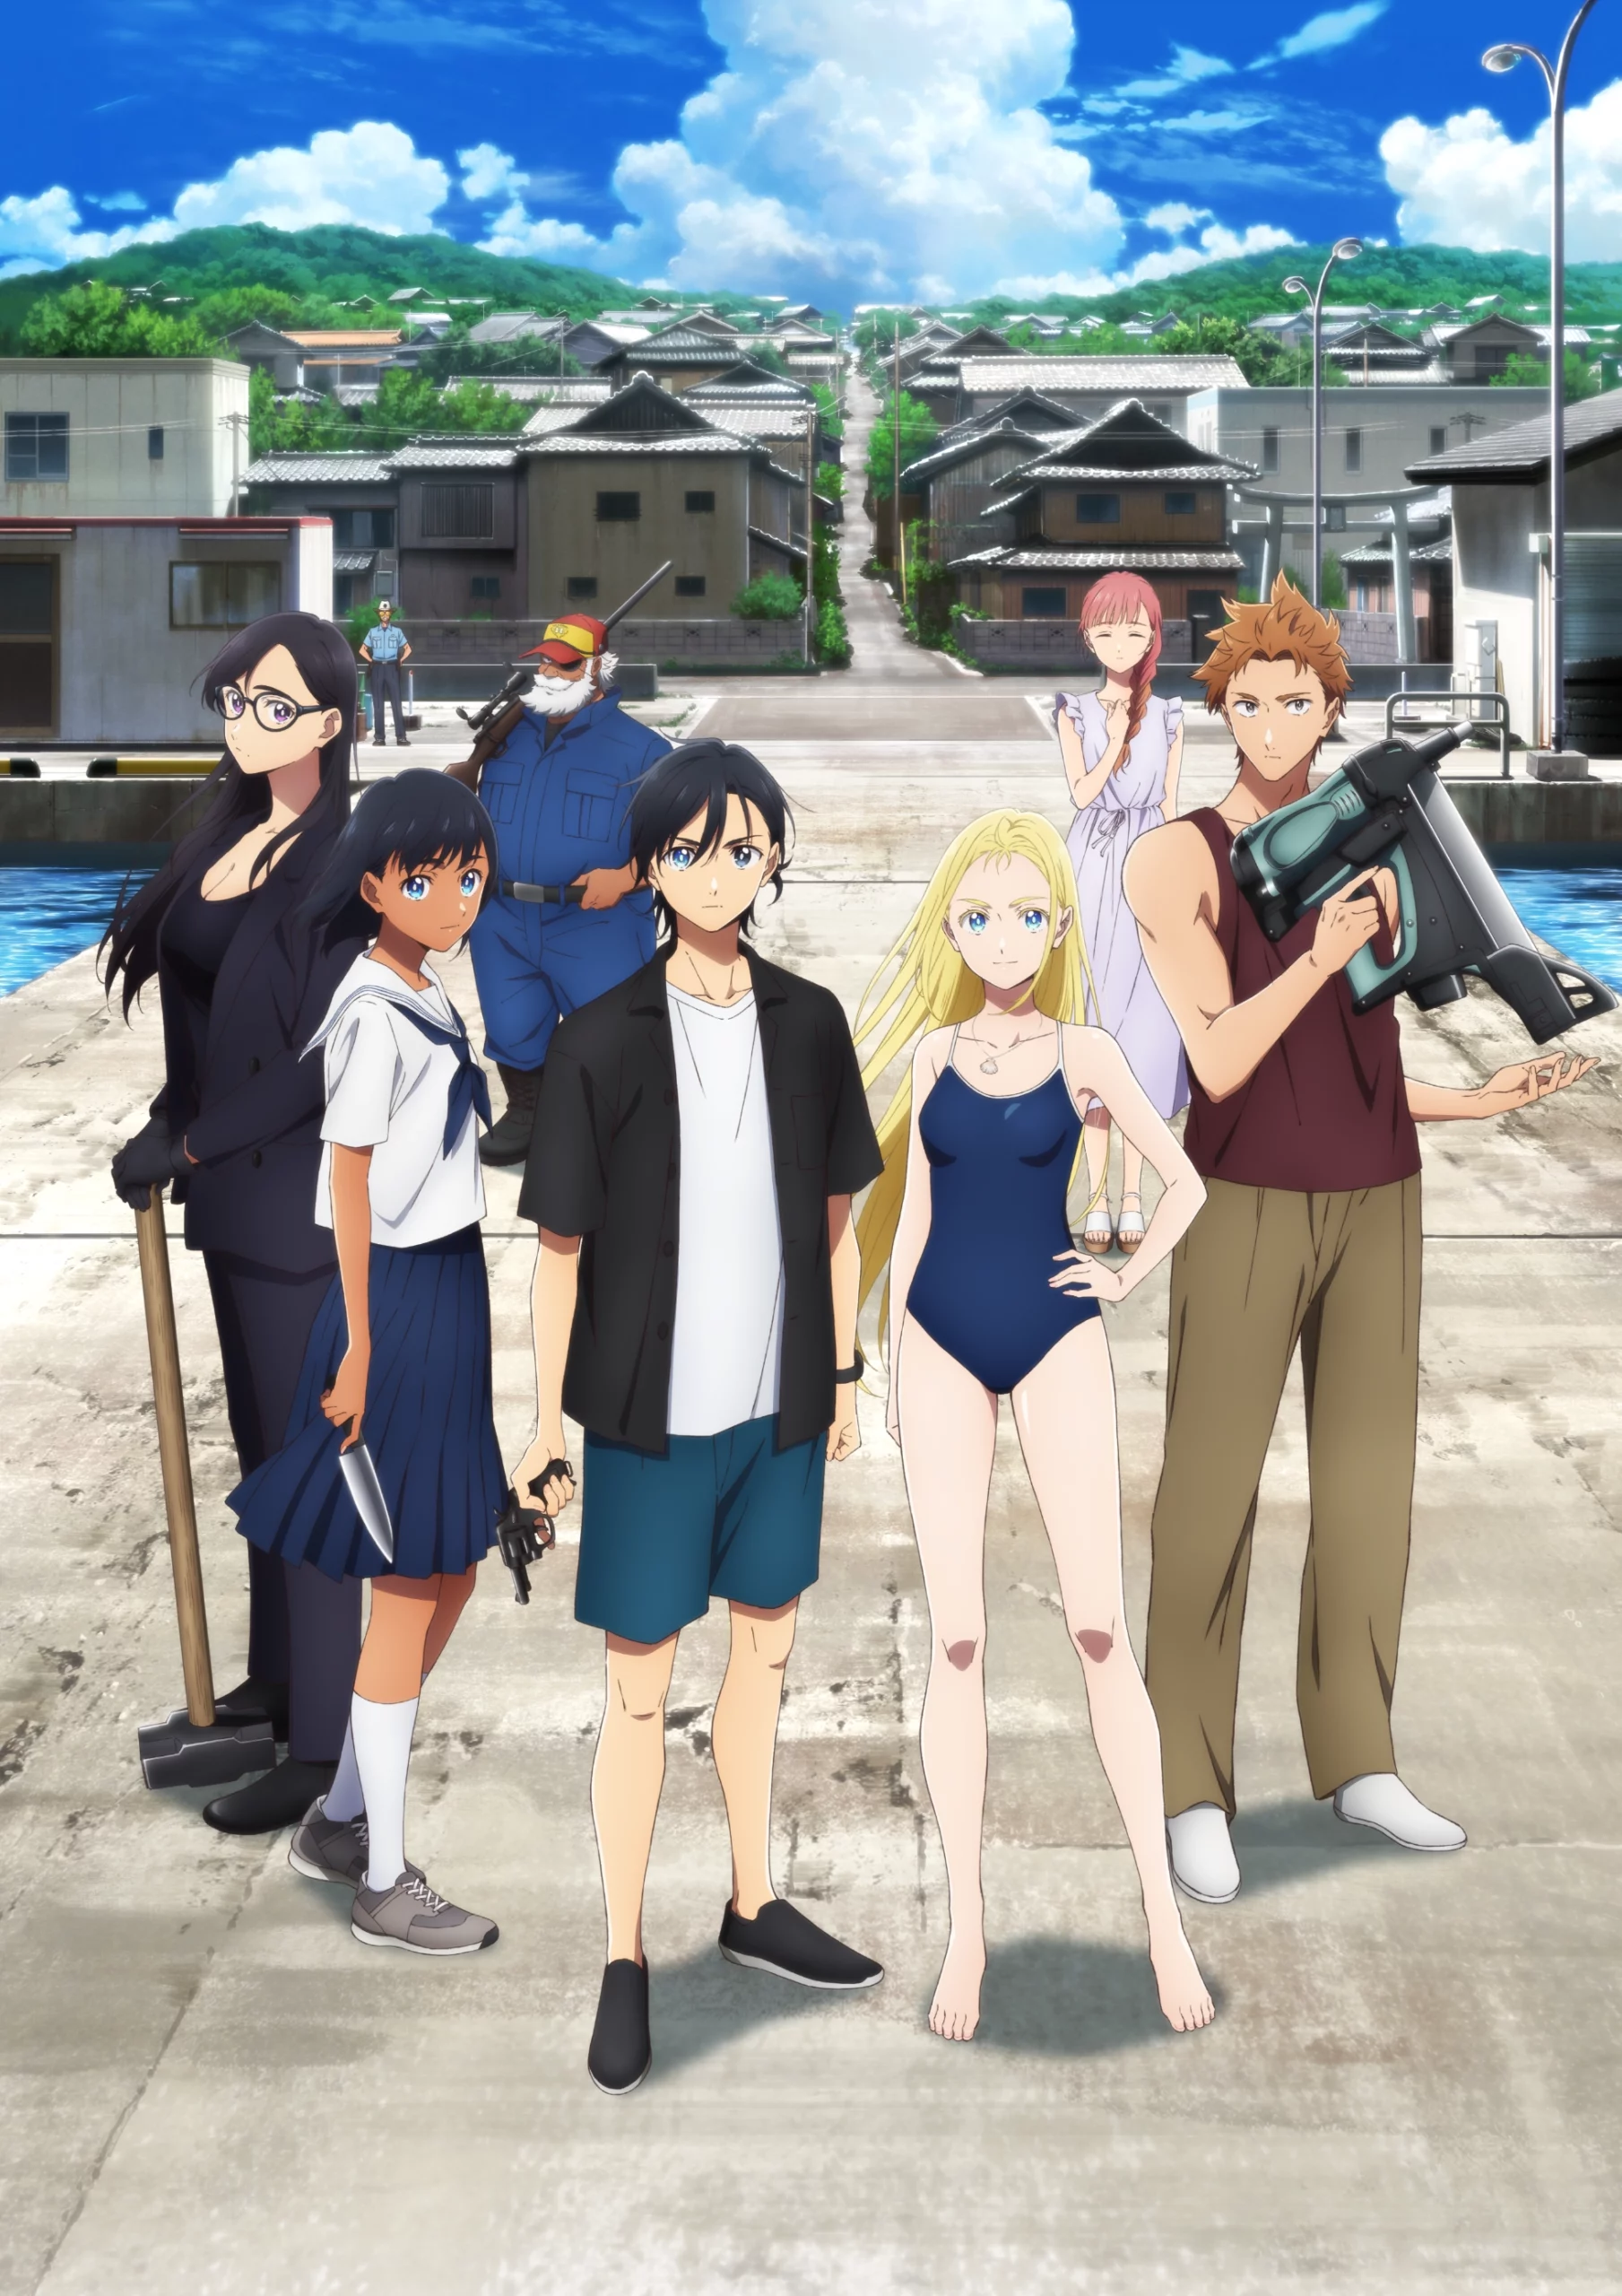 Summer Time Rendering Reveals First Opening Theme Song